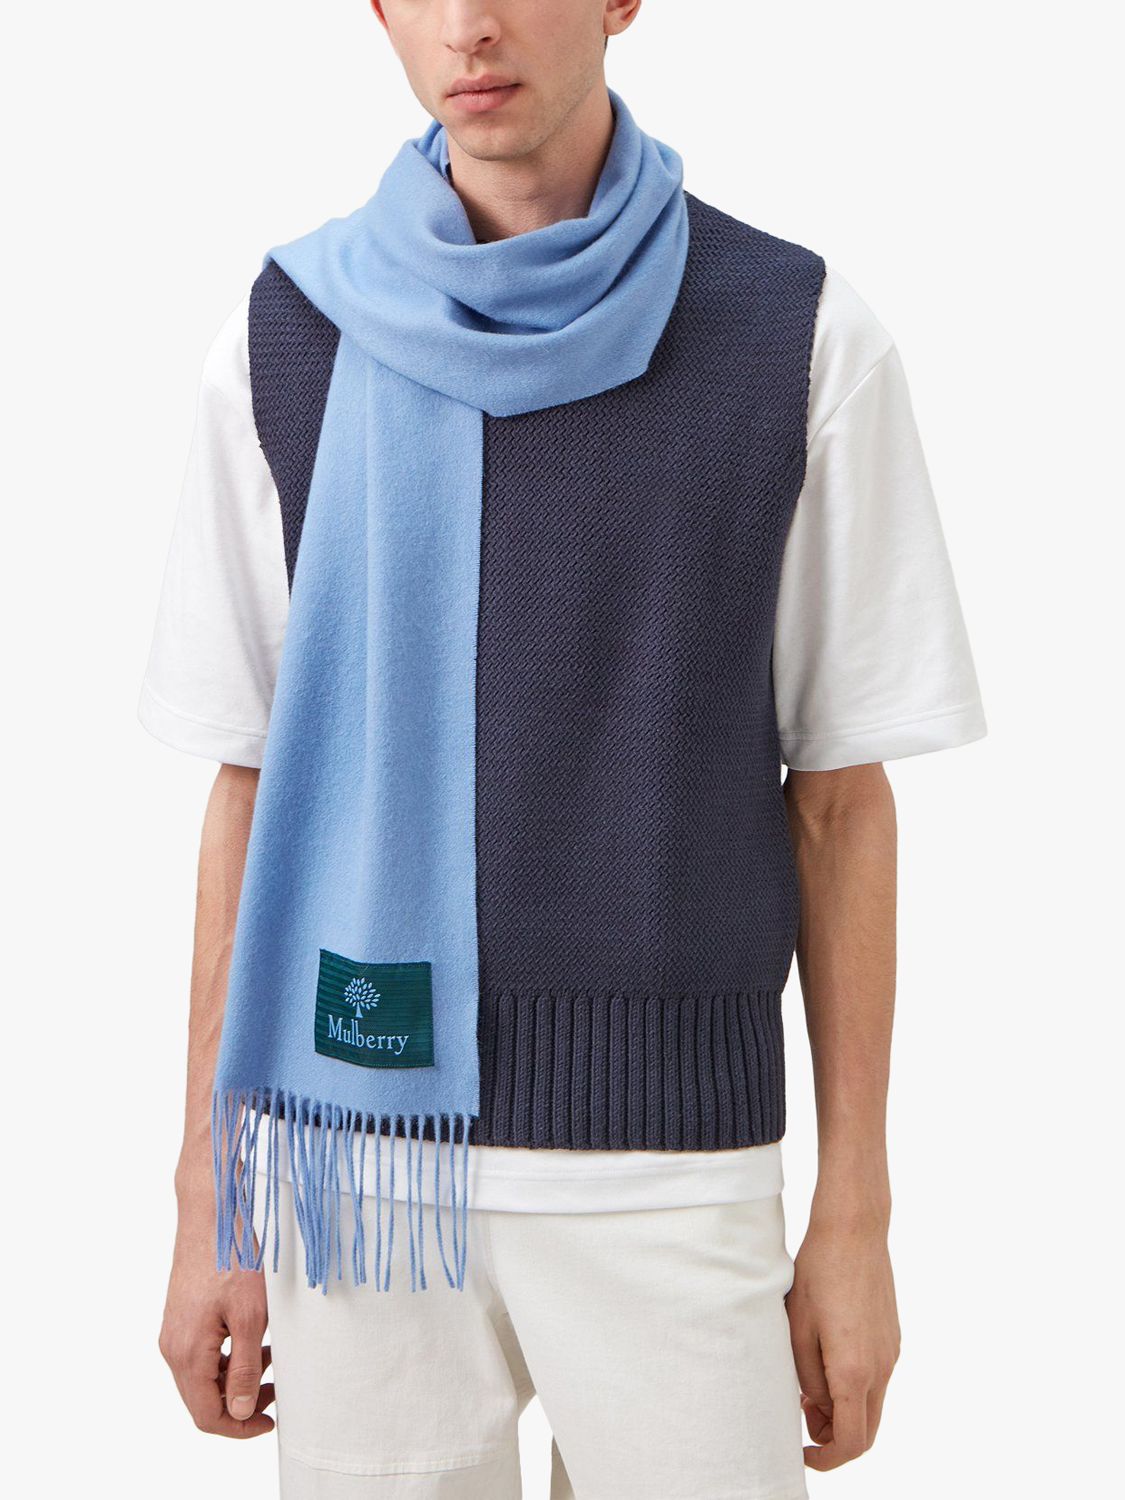 Mulberry Cashmere Scarf, Cornflower Blue at John Lewis & Partners